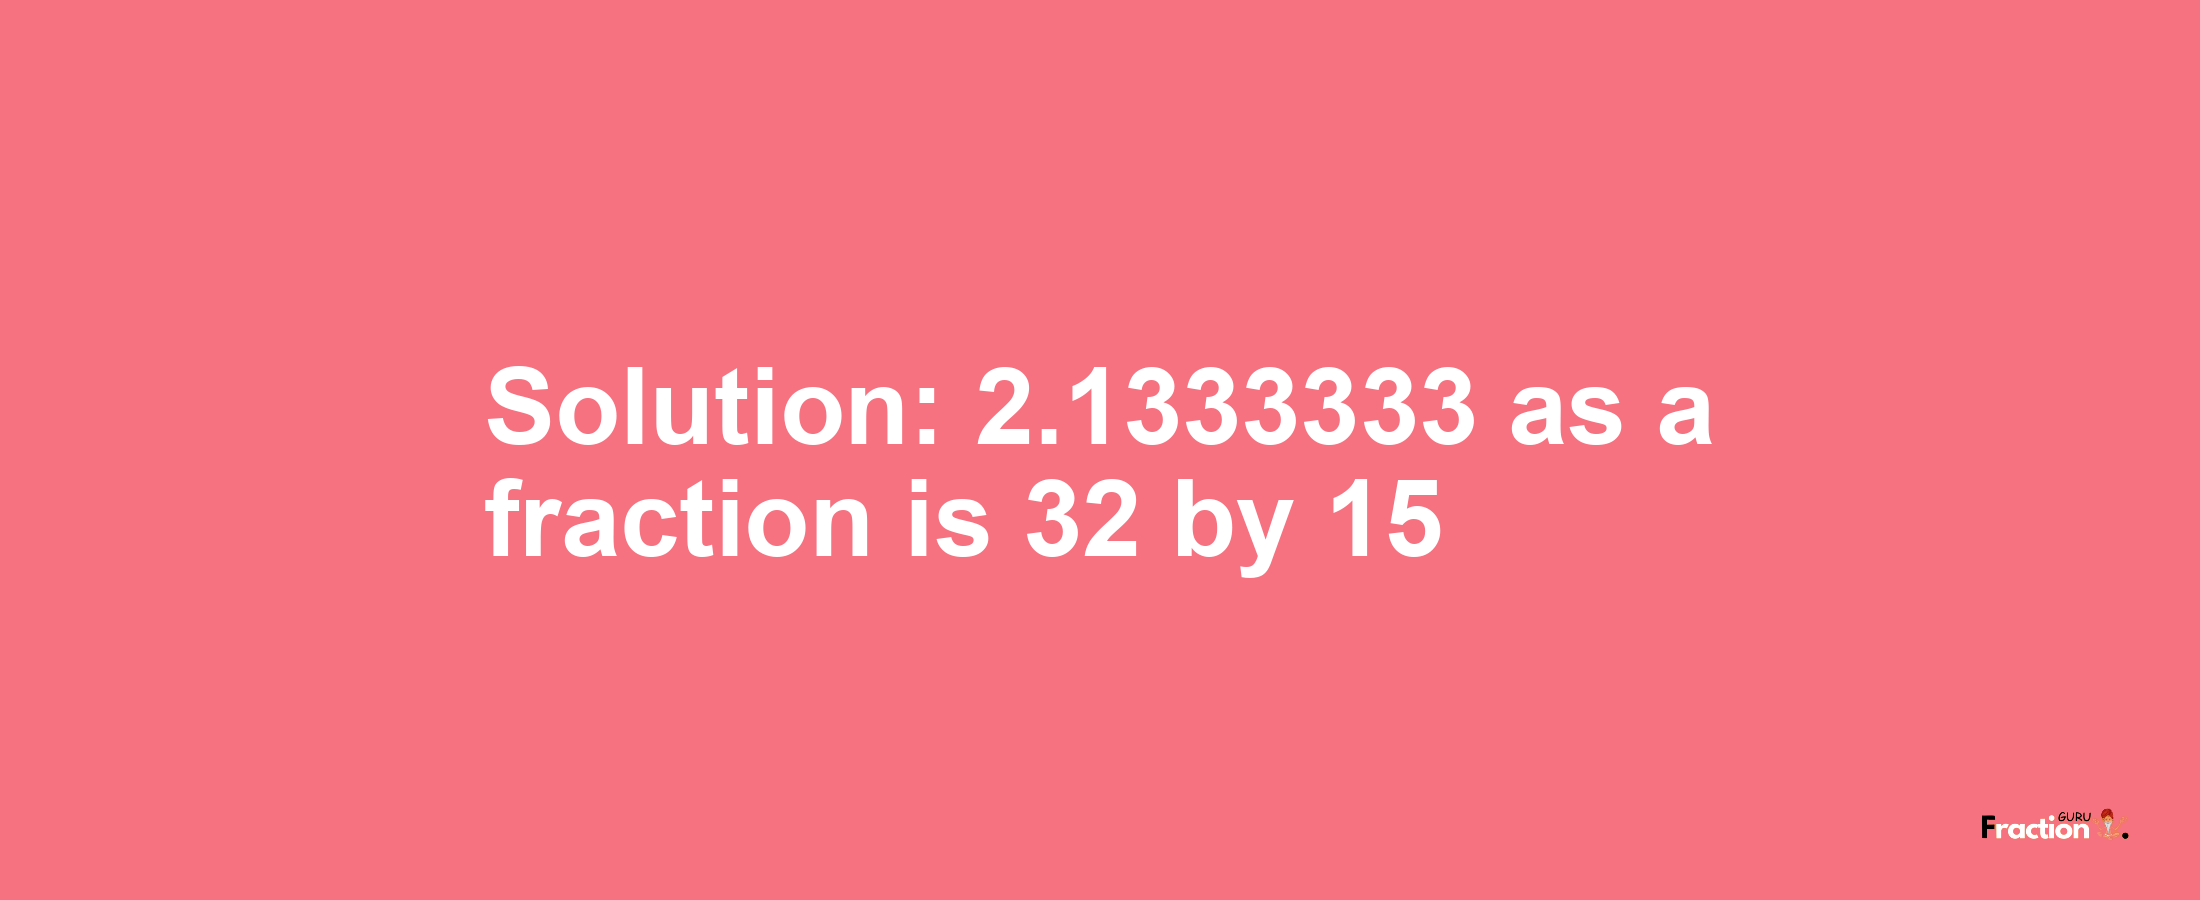 Solution:2.1333333 as a fraction is 32/15